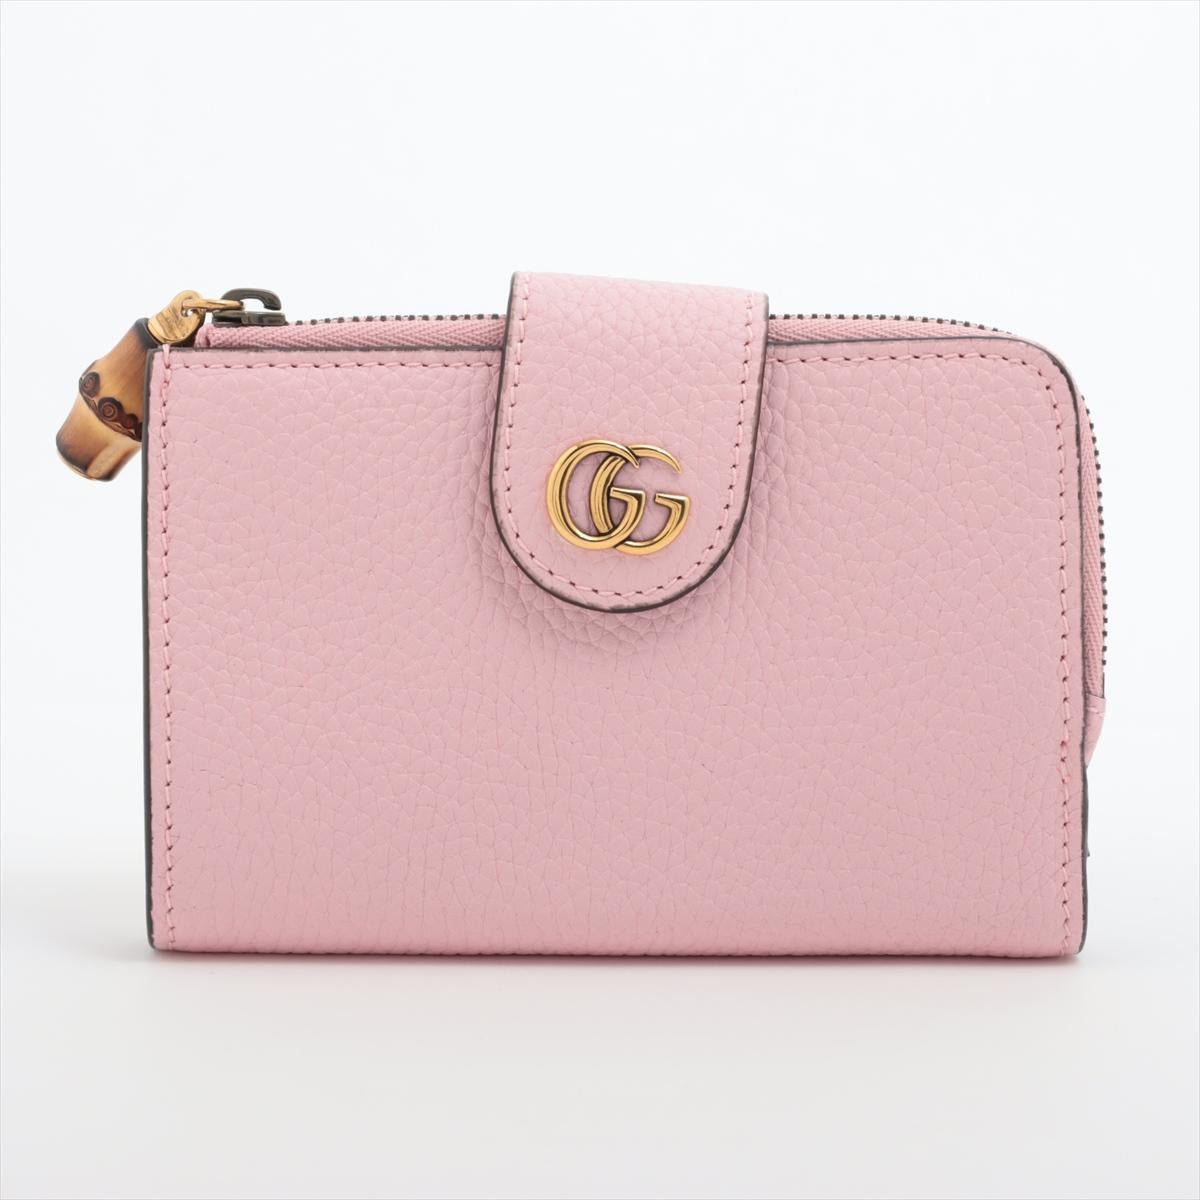 The Gucci Bamboo Double G Leather Bi-fold Wallet in Pink is a luxurious and stylish accessory that embodies the essence of Gucci's iconic design elements. Crafted from high-quality leather, the bi-fold wallet features a signature bamboo zipper pull